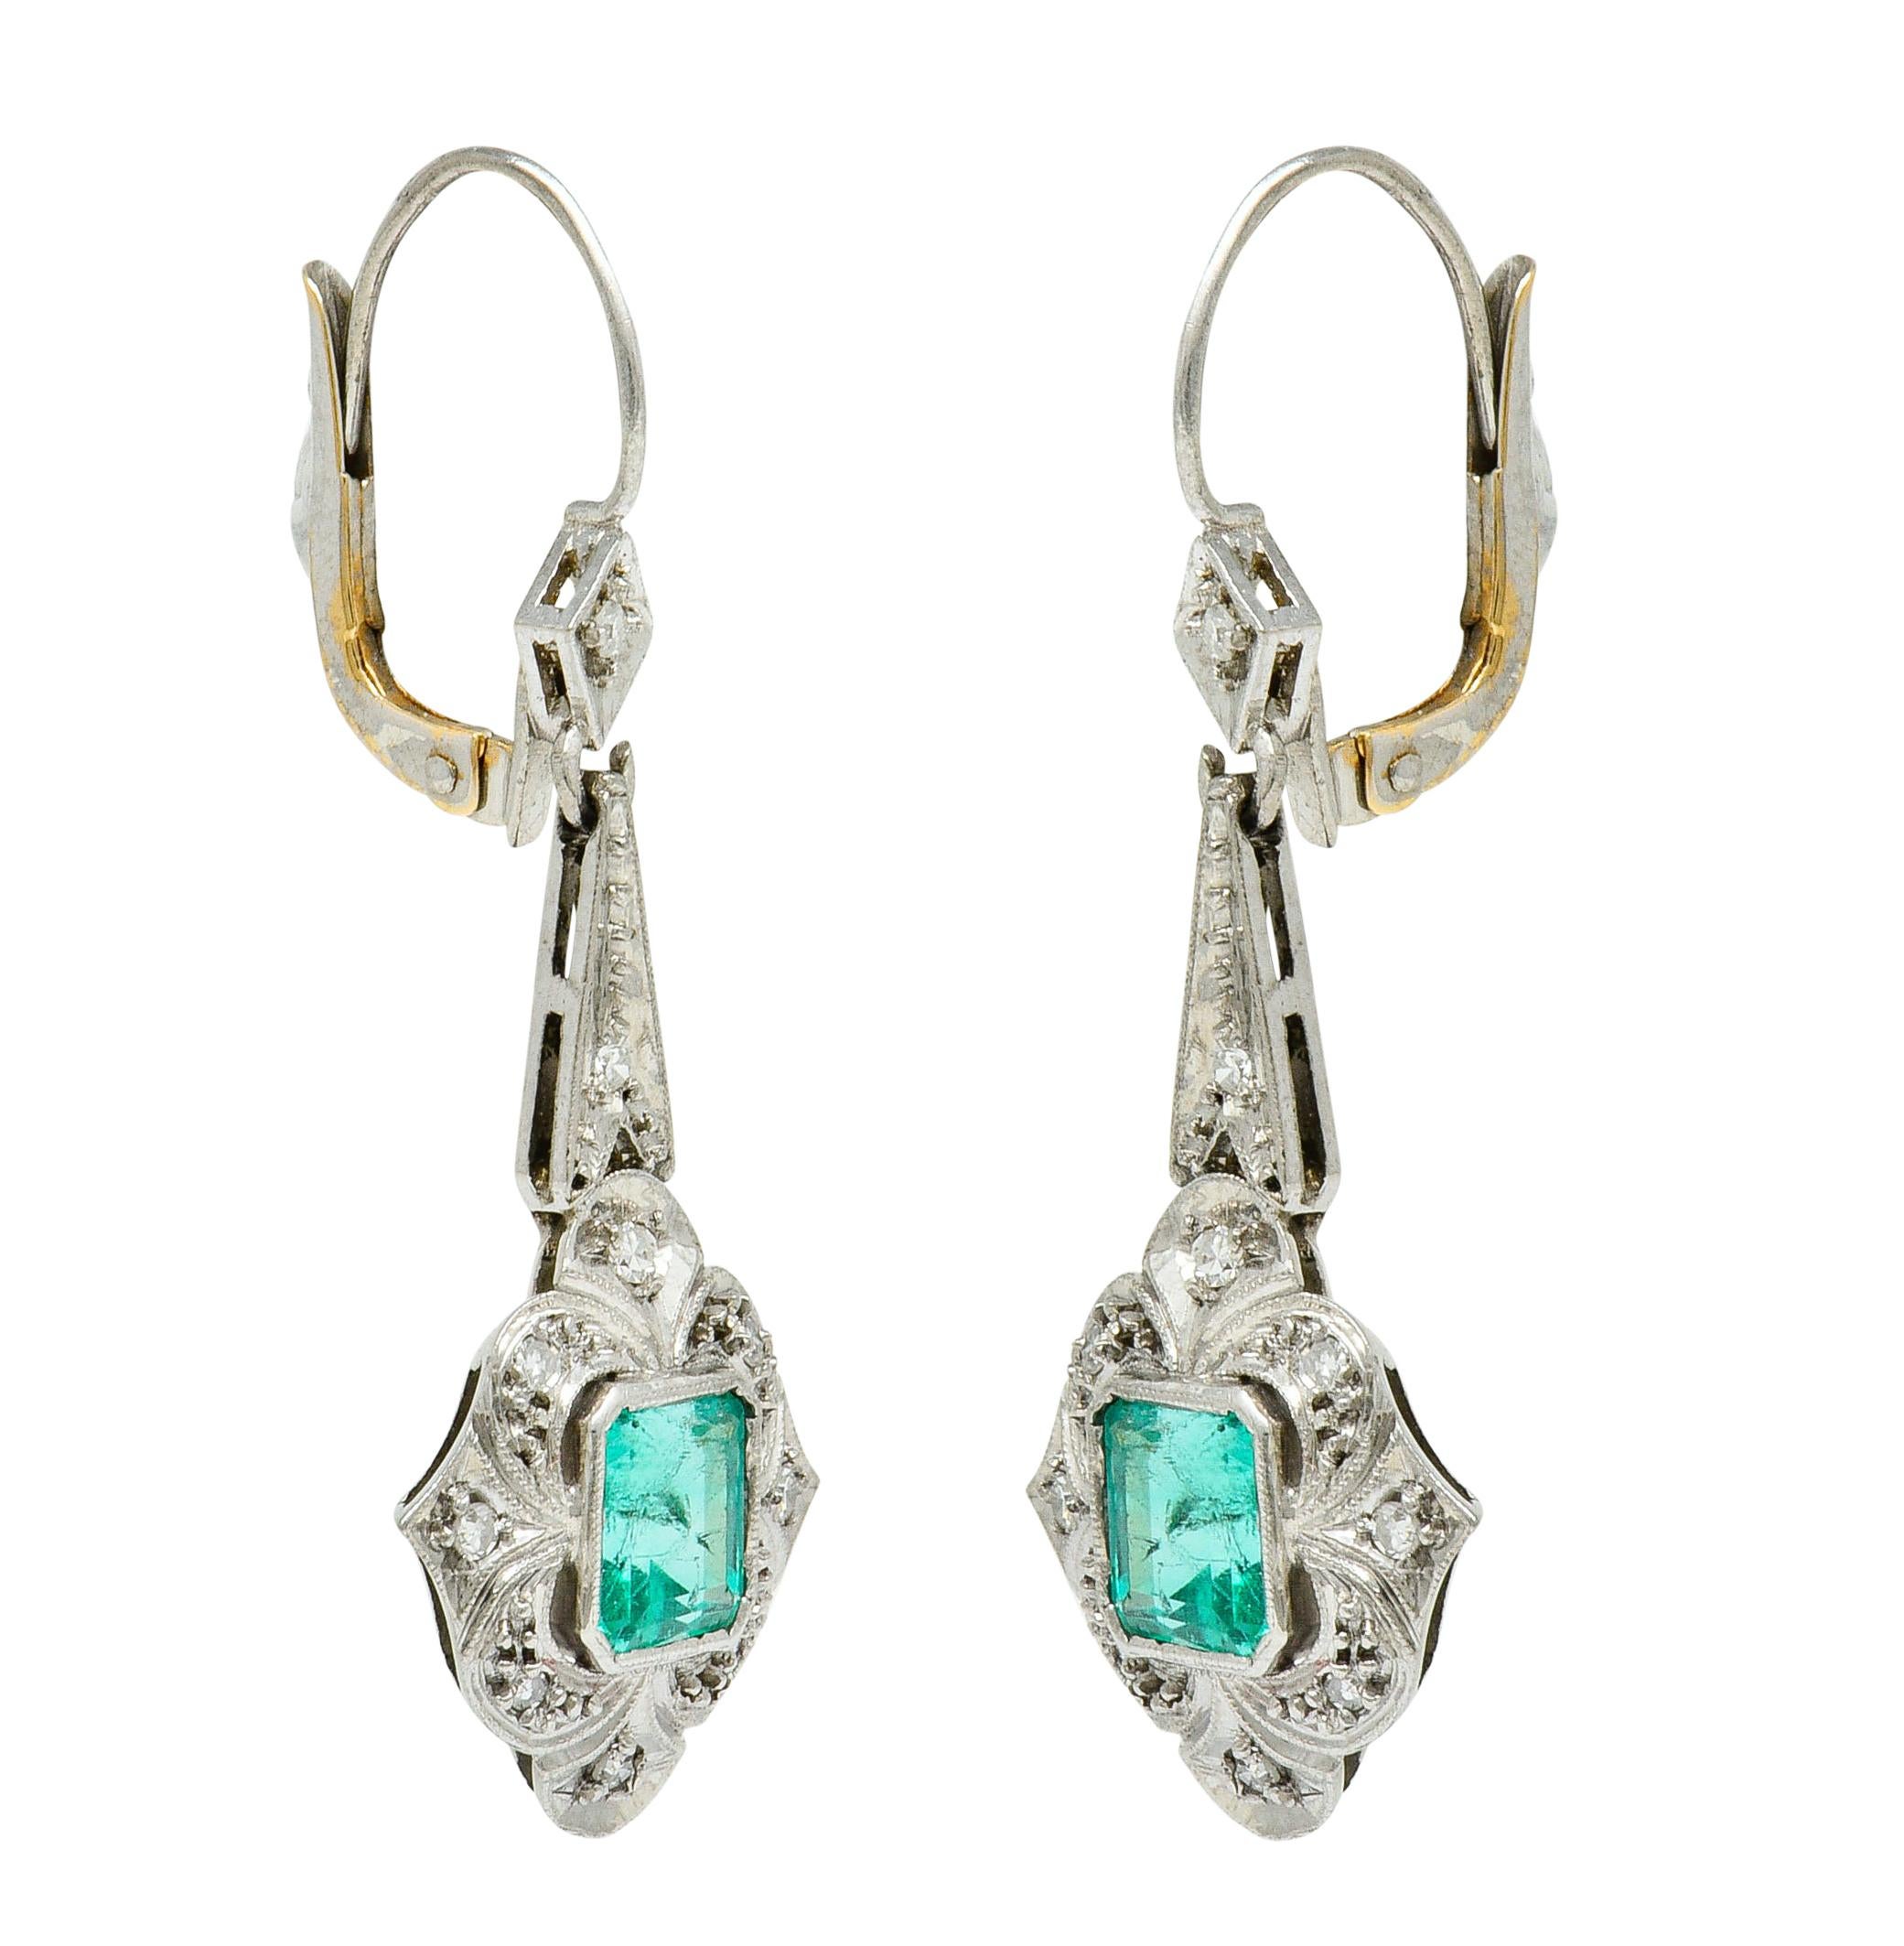 Drop earrings are designed as stylized quatrefoils with milgrain edges

Centering emerald cut emeralds weighing in total approximately 2.00 carats

Very well-matched, transparent, and vibrantly bluish-green in color; one has a surface reaching